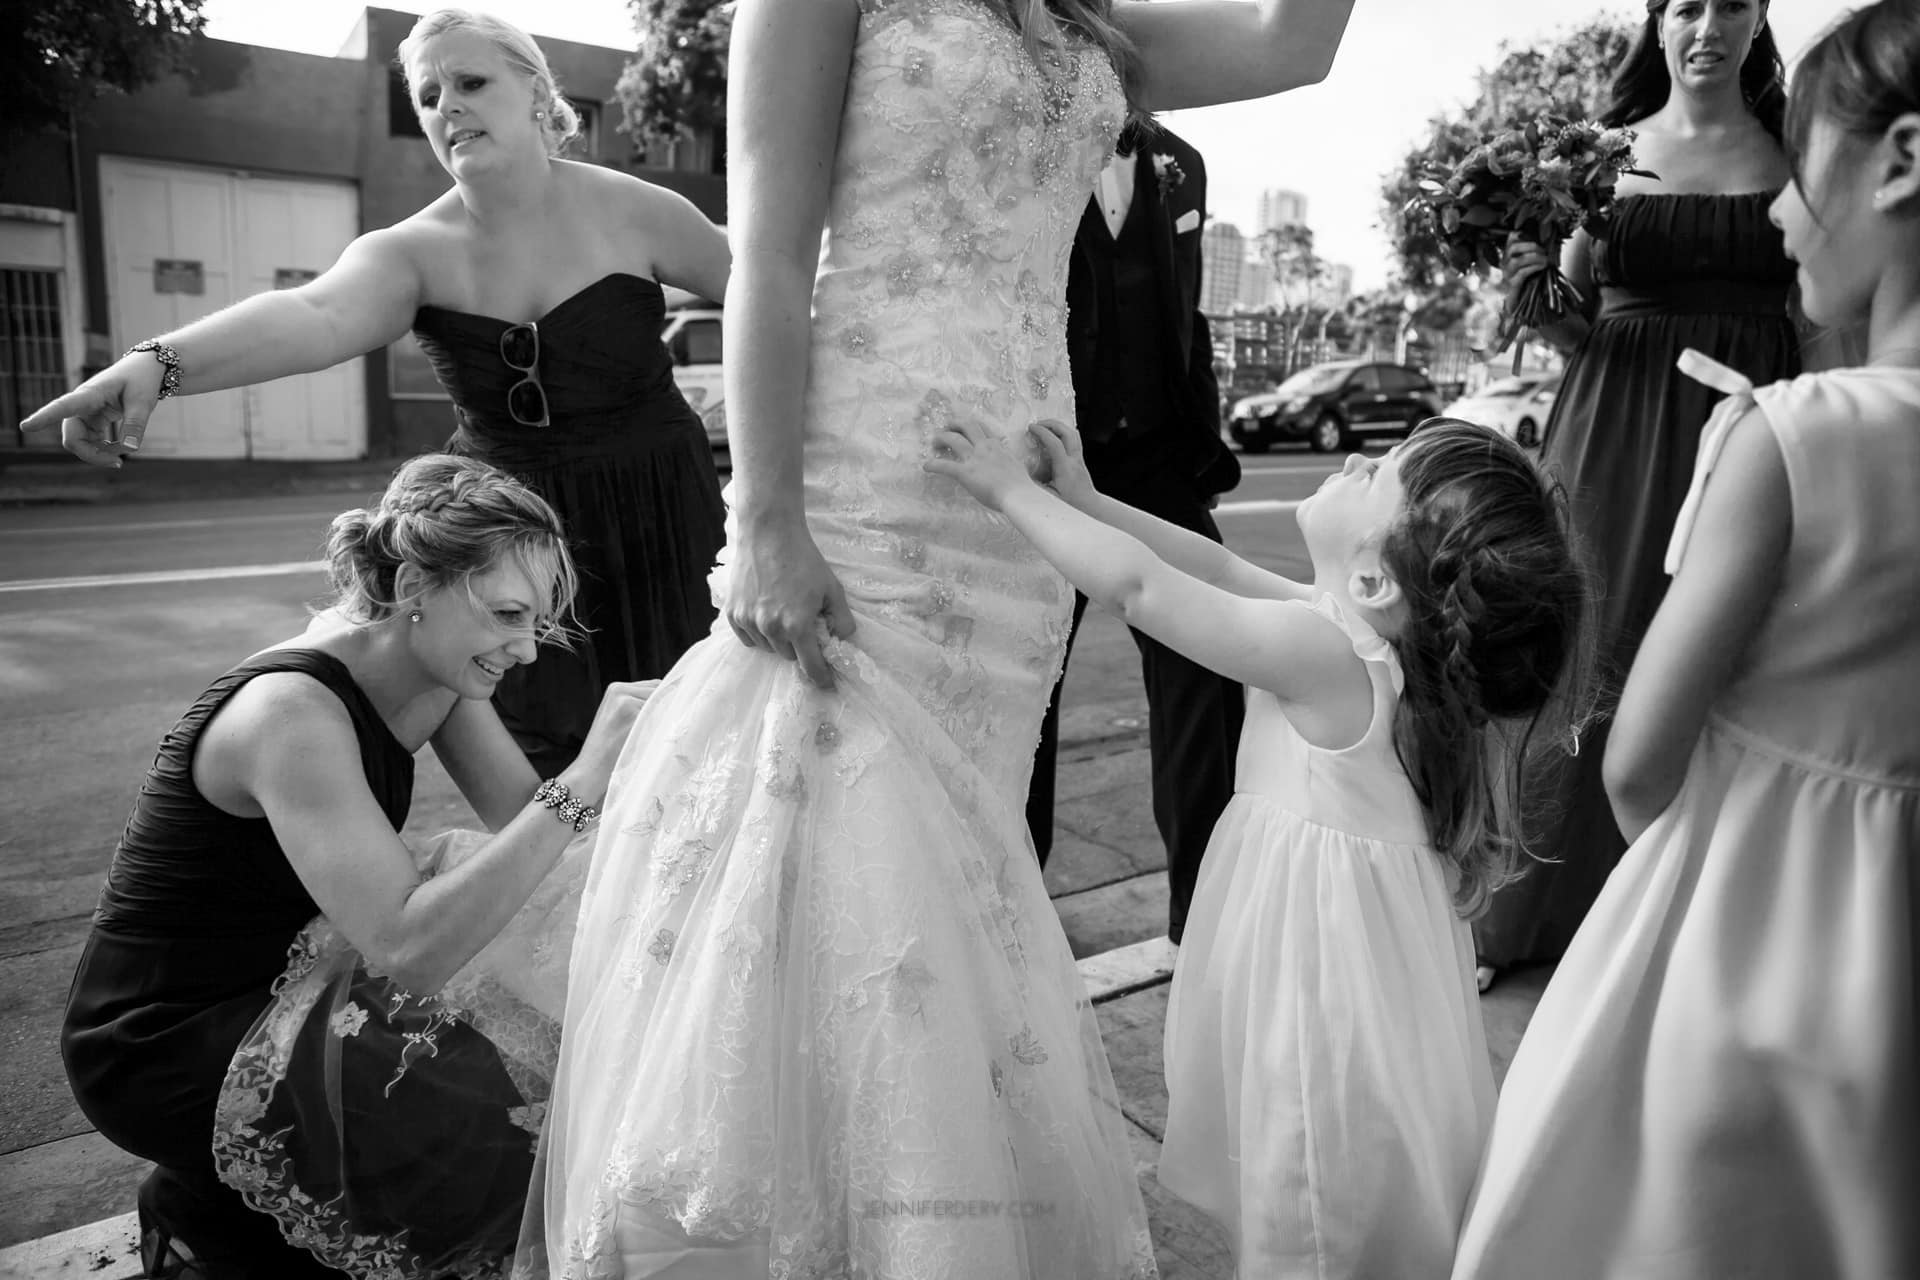 vision for wedding photos is documentary b&w wedding photos. here, a bride and flower girl. the little girl is trying to get the bride's attention while bridesmaids try to help in the background